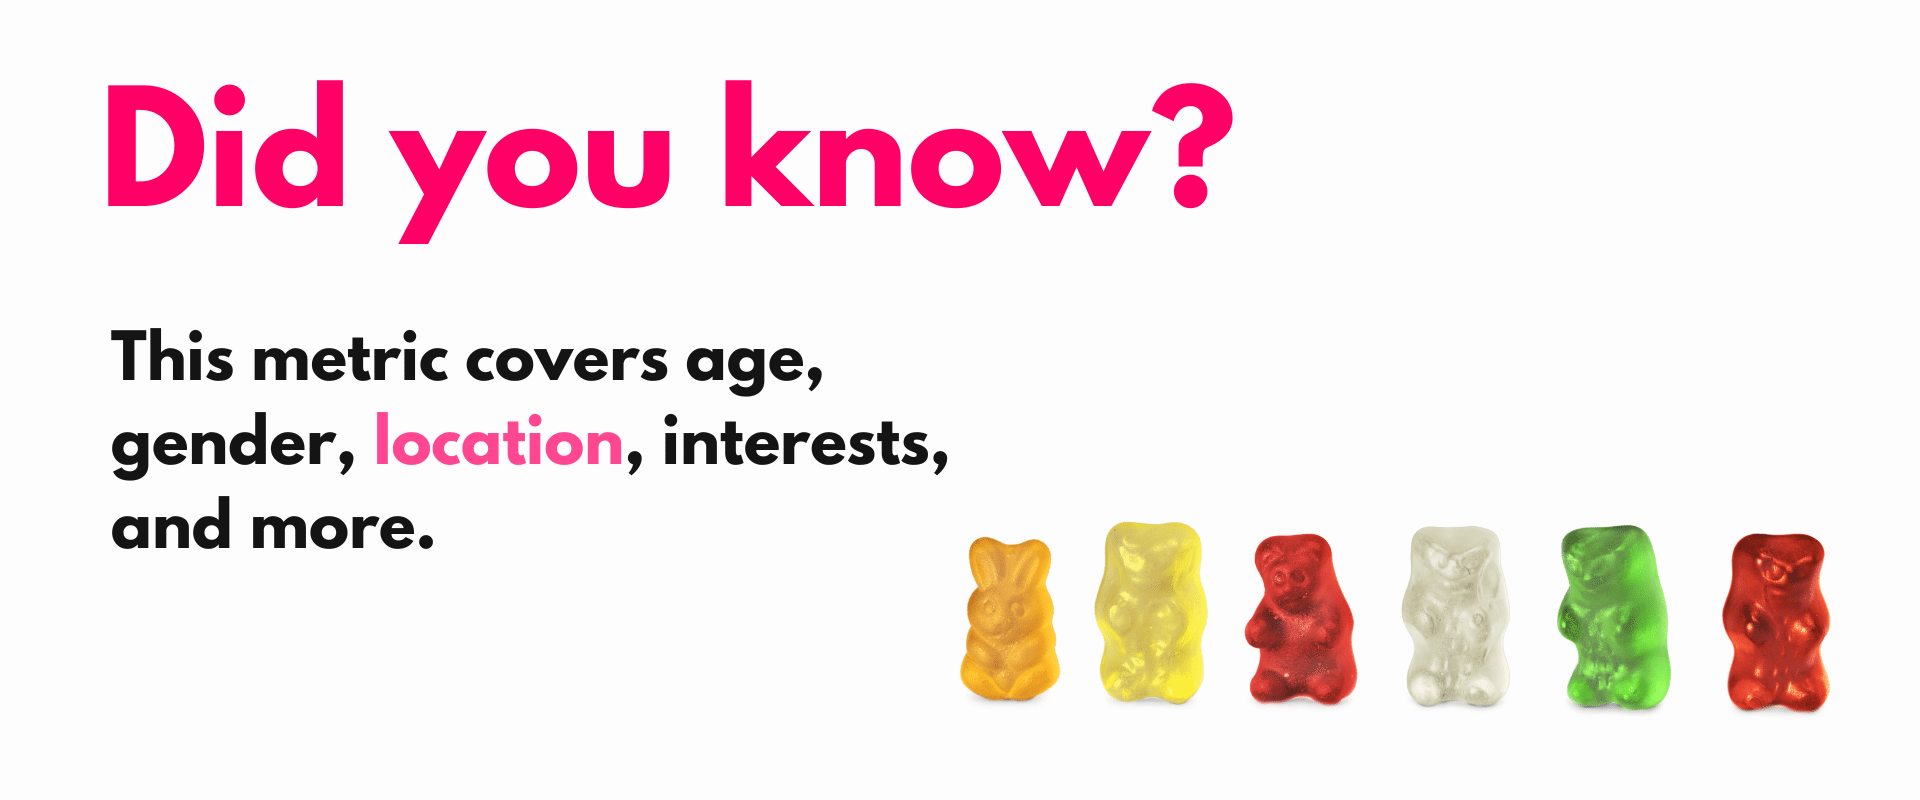 Did you know? this metric covers age, gender, location, interest, and more.